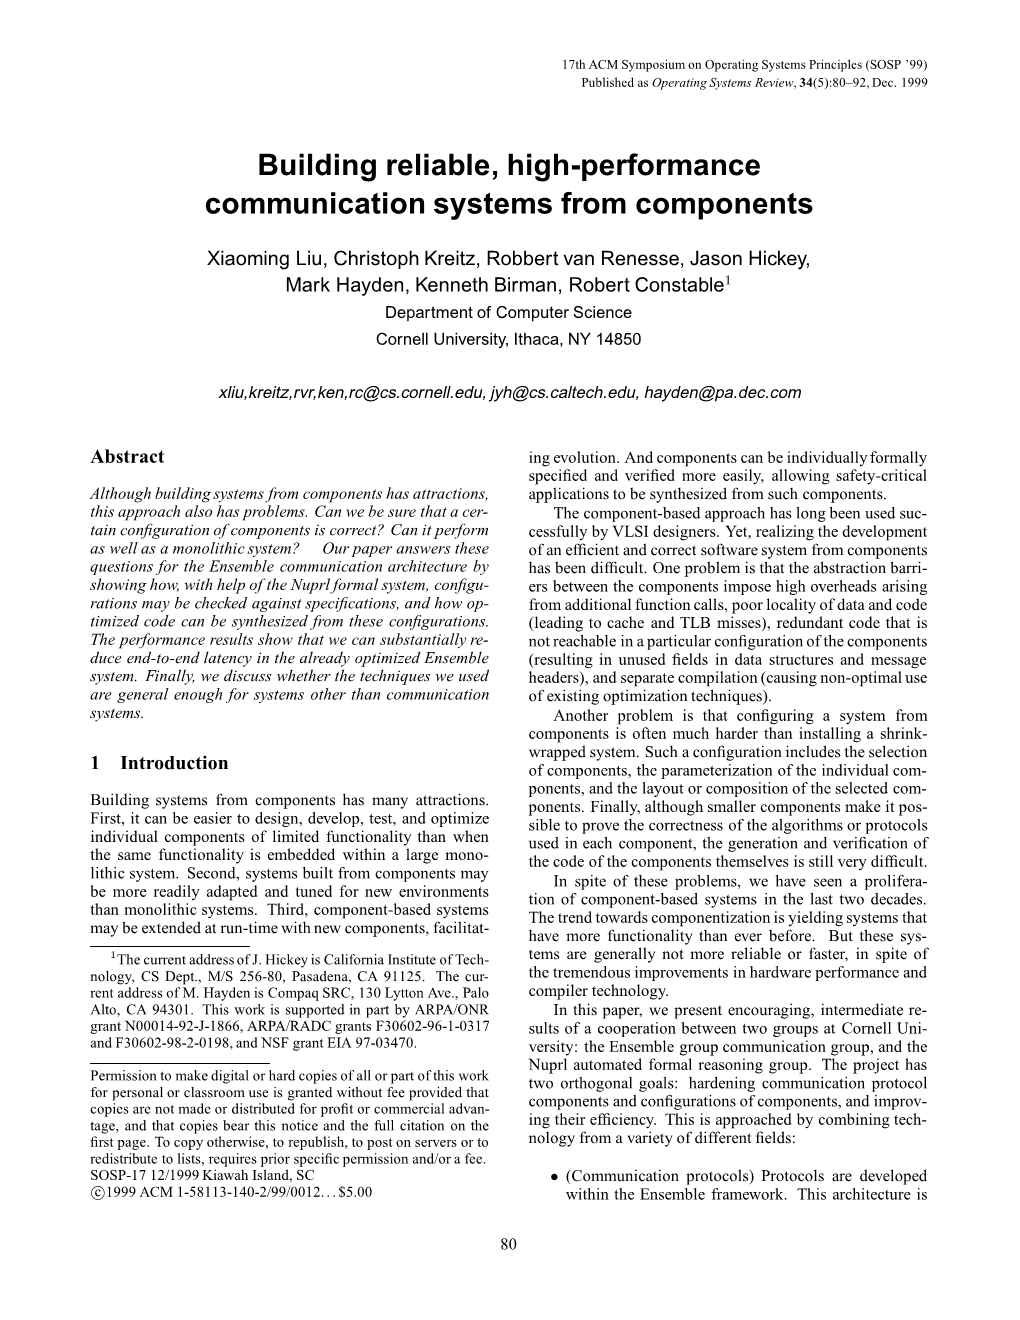 Building Reliable, High-Performance Communication Systems from Components